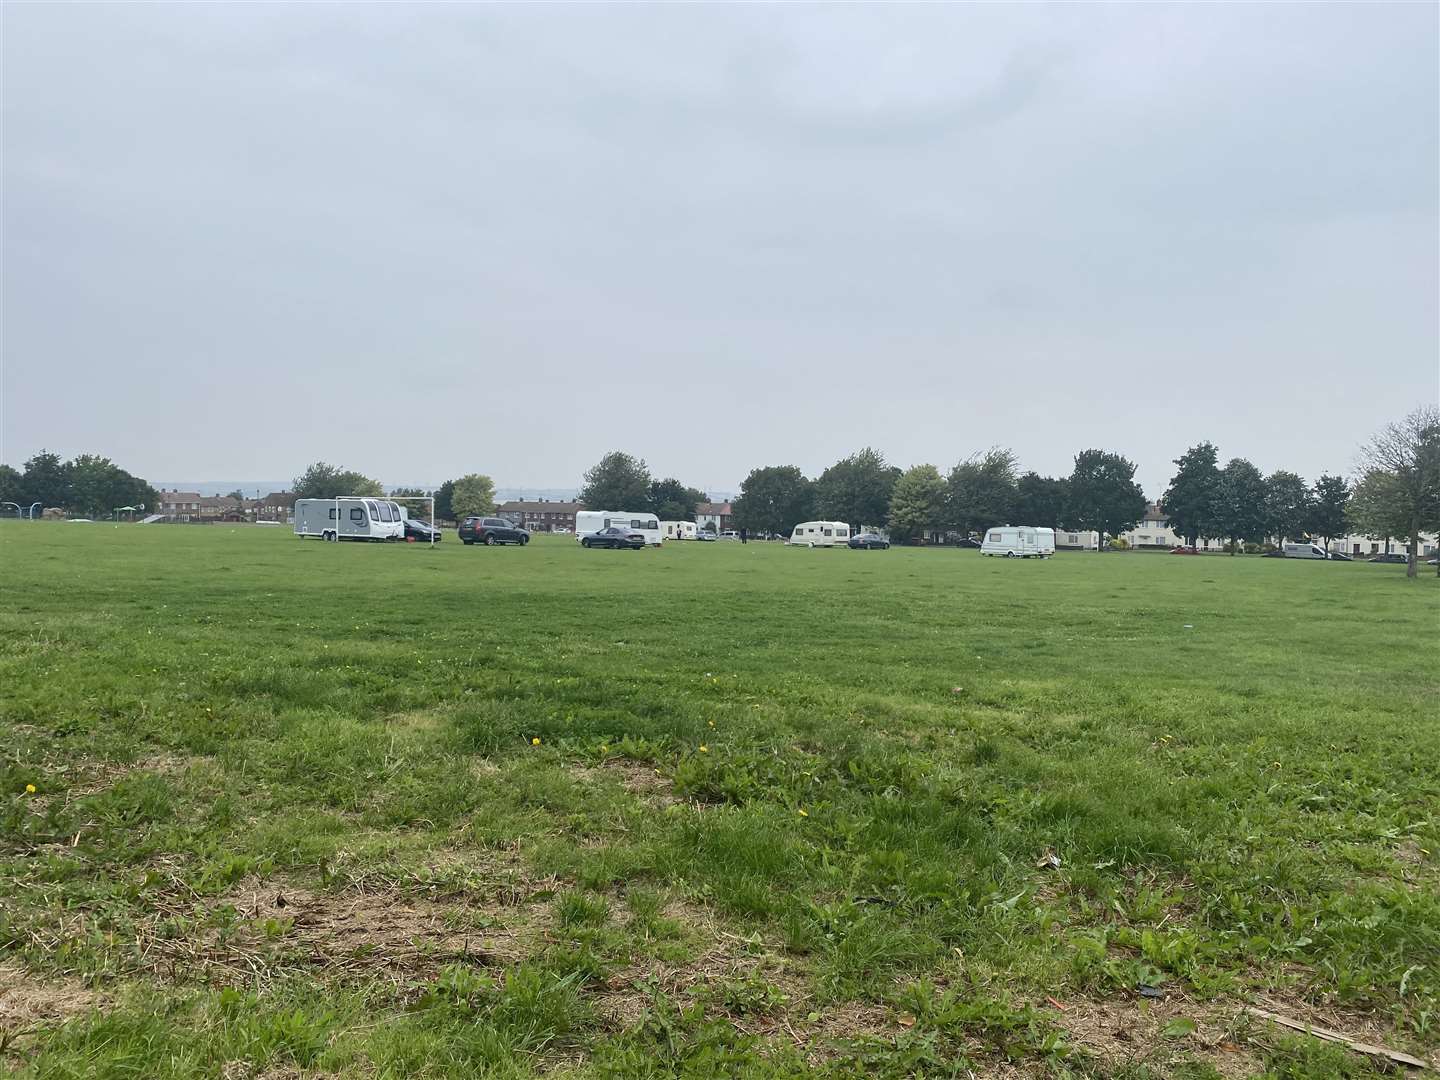 Caravans arrived on Beechings playing fields on Sunday night